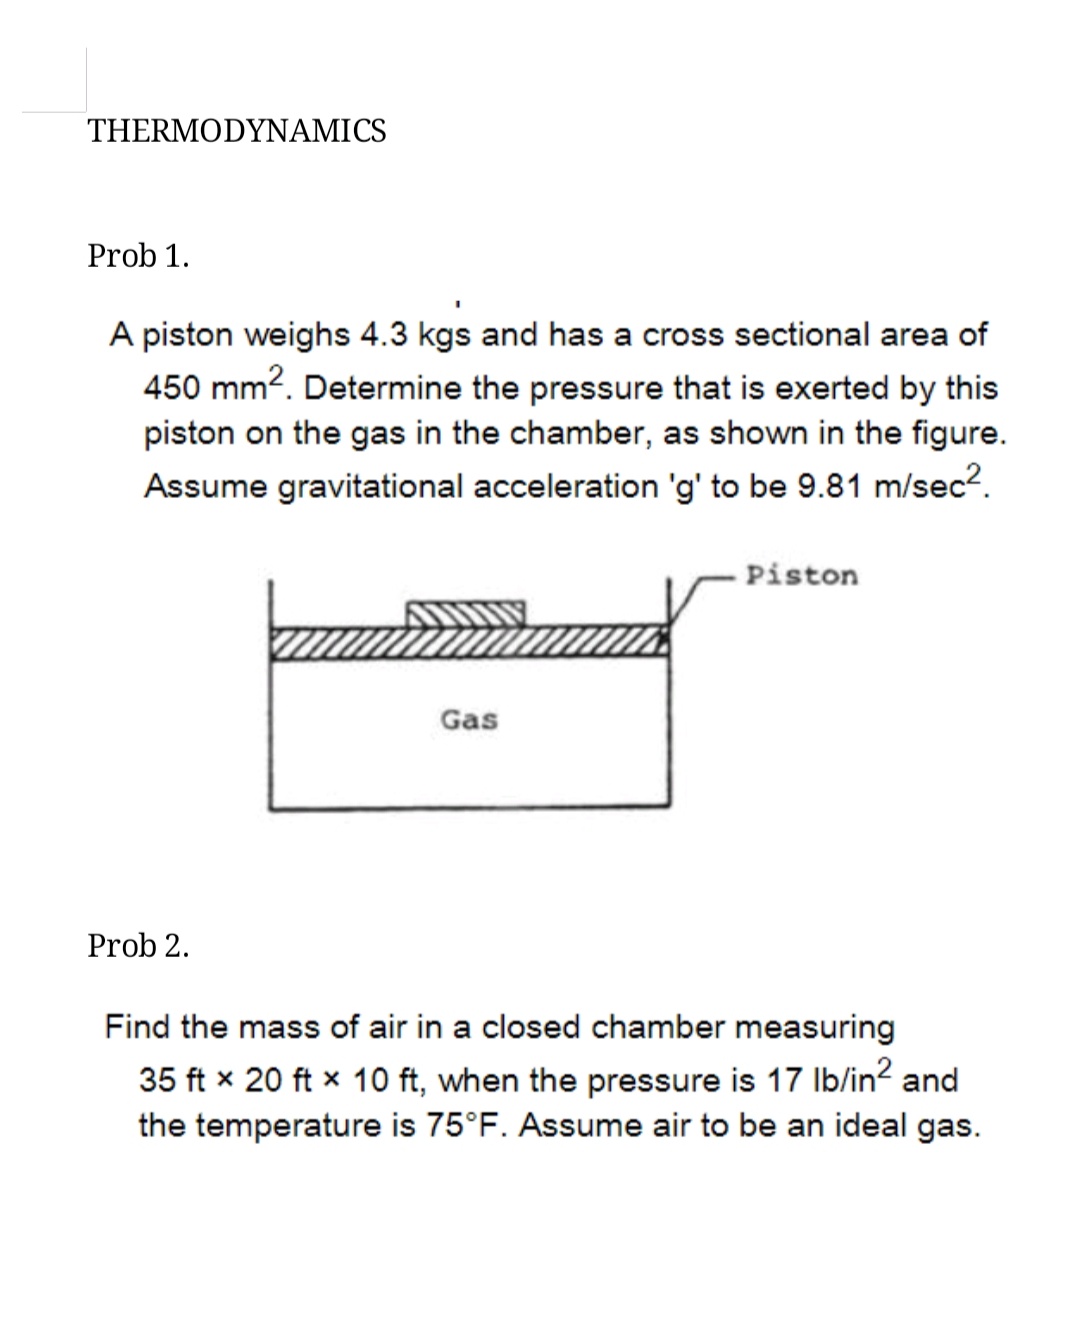 THERMODYNAMICS
Prob 1.
A piston weighs 4.3 kgs and has a cross sectional area of
450 mm2. Determine the pressure that is exerted by this
piston on the gas in the chamber, as shown in the figure.
Assume gravitational acceleration 'g' to be 9.81 m/sec2.
Piston
Gas
Prob 2.
Find the mass of air in a closed chamber measuring
35 ft x 20 ft x 10 ft, when the pressure is 17 Ib/in? and
the temperature is 75°F. Assume air to be an ideal gas.
